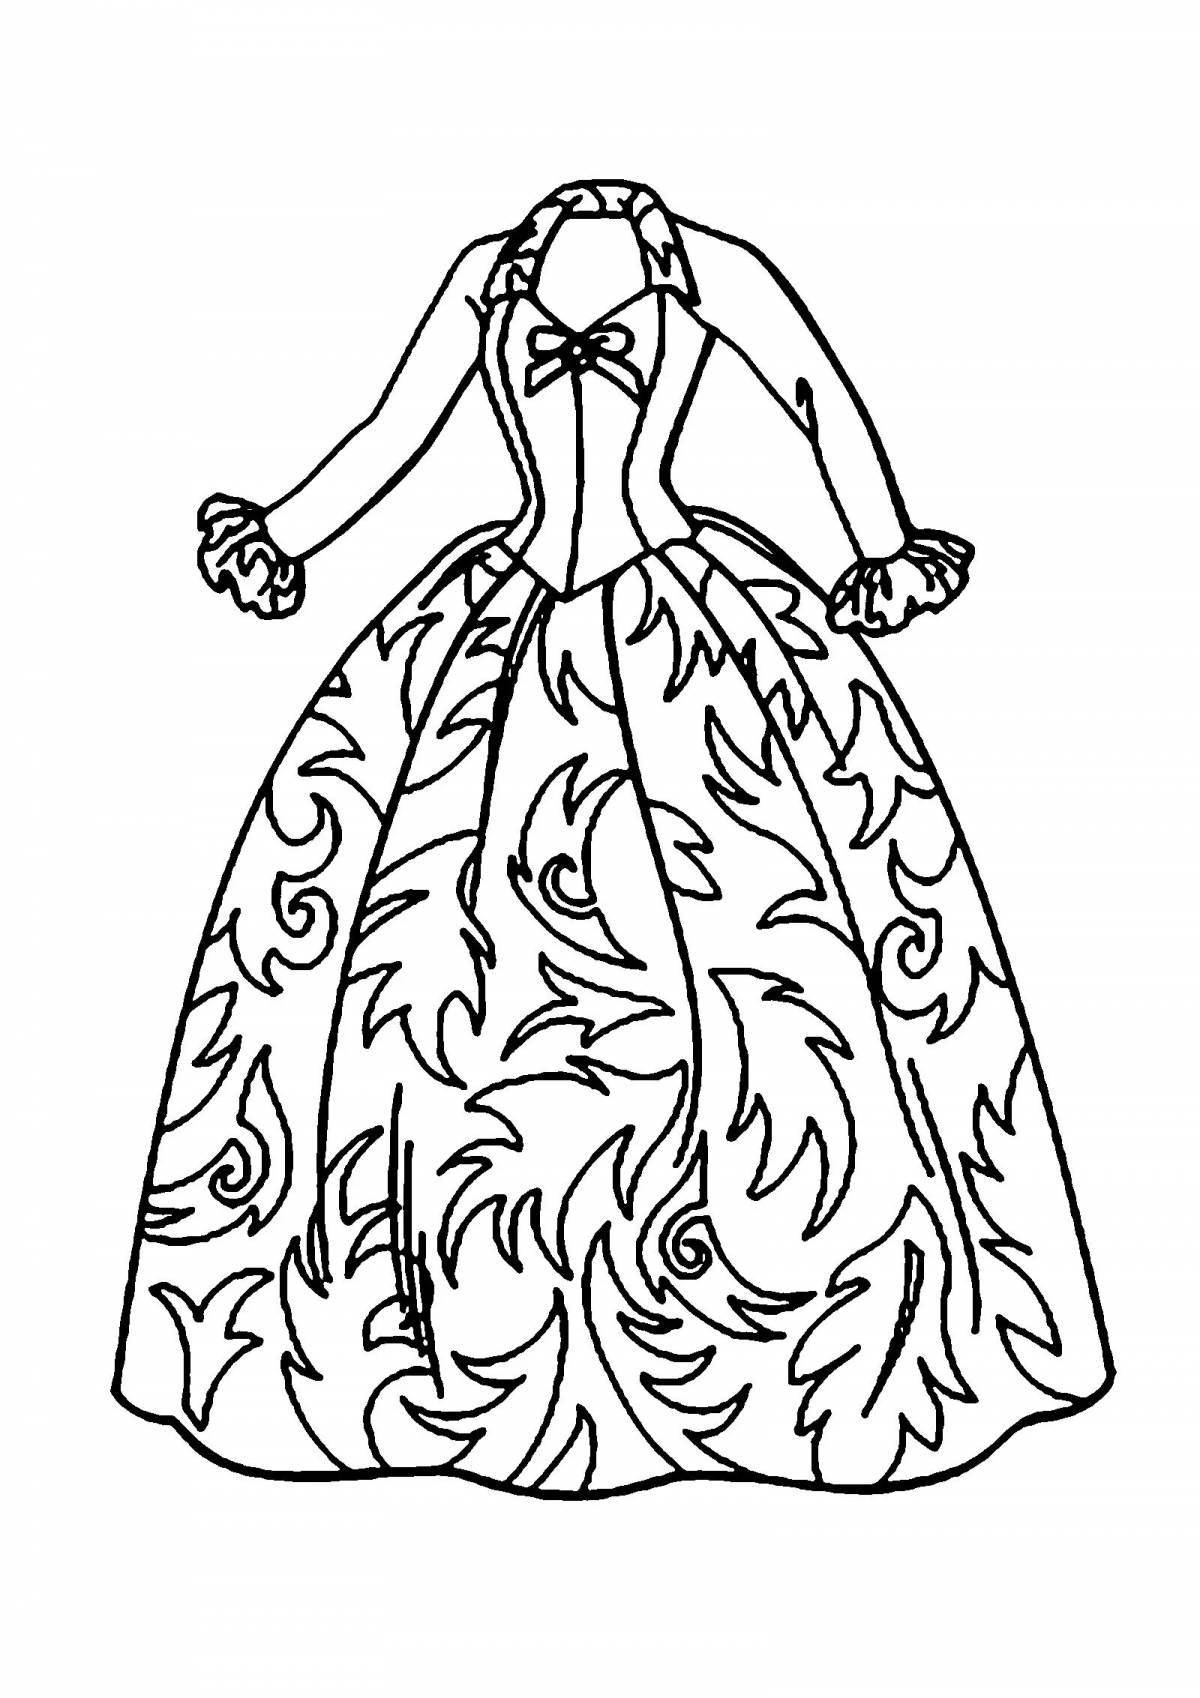 Colorful clothes coloring page